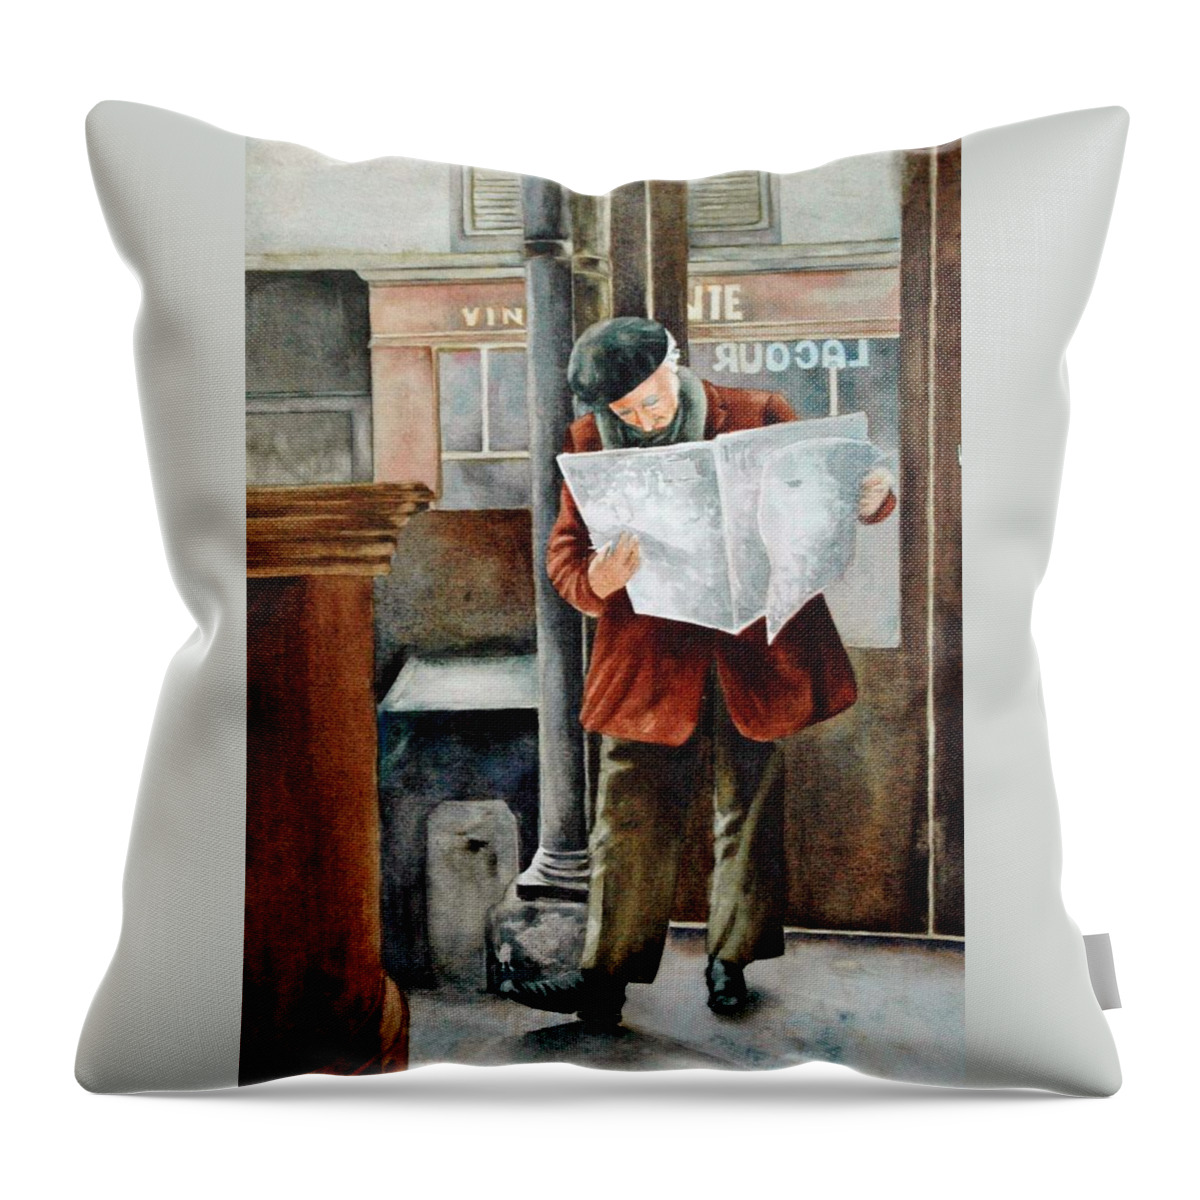 Man Throw Pillow featuring the painting The Latest News by Diane Fujimoto